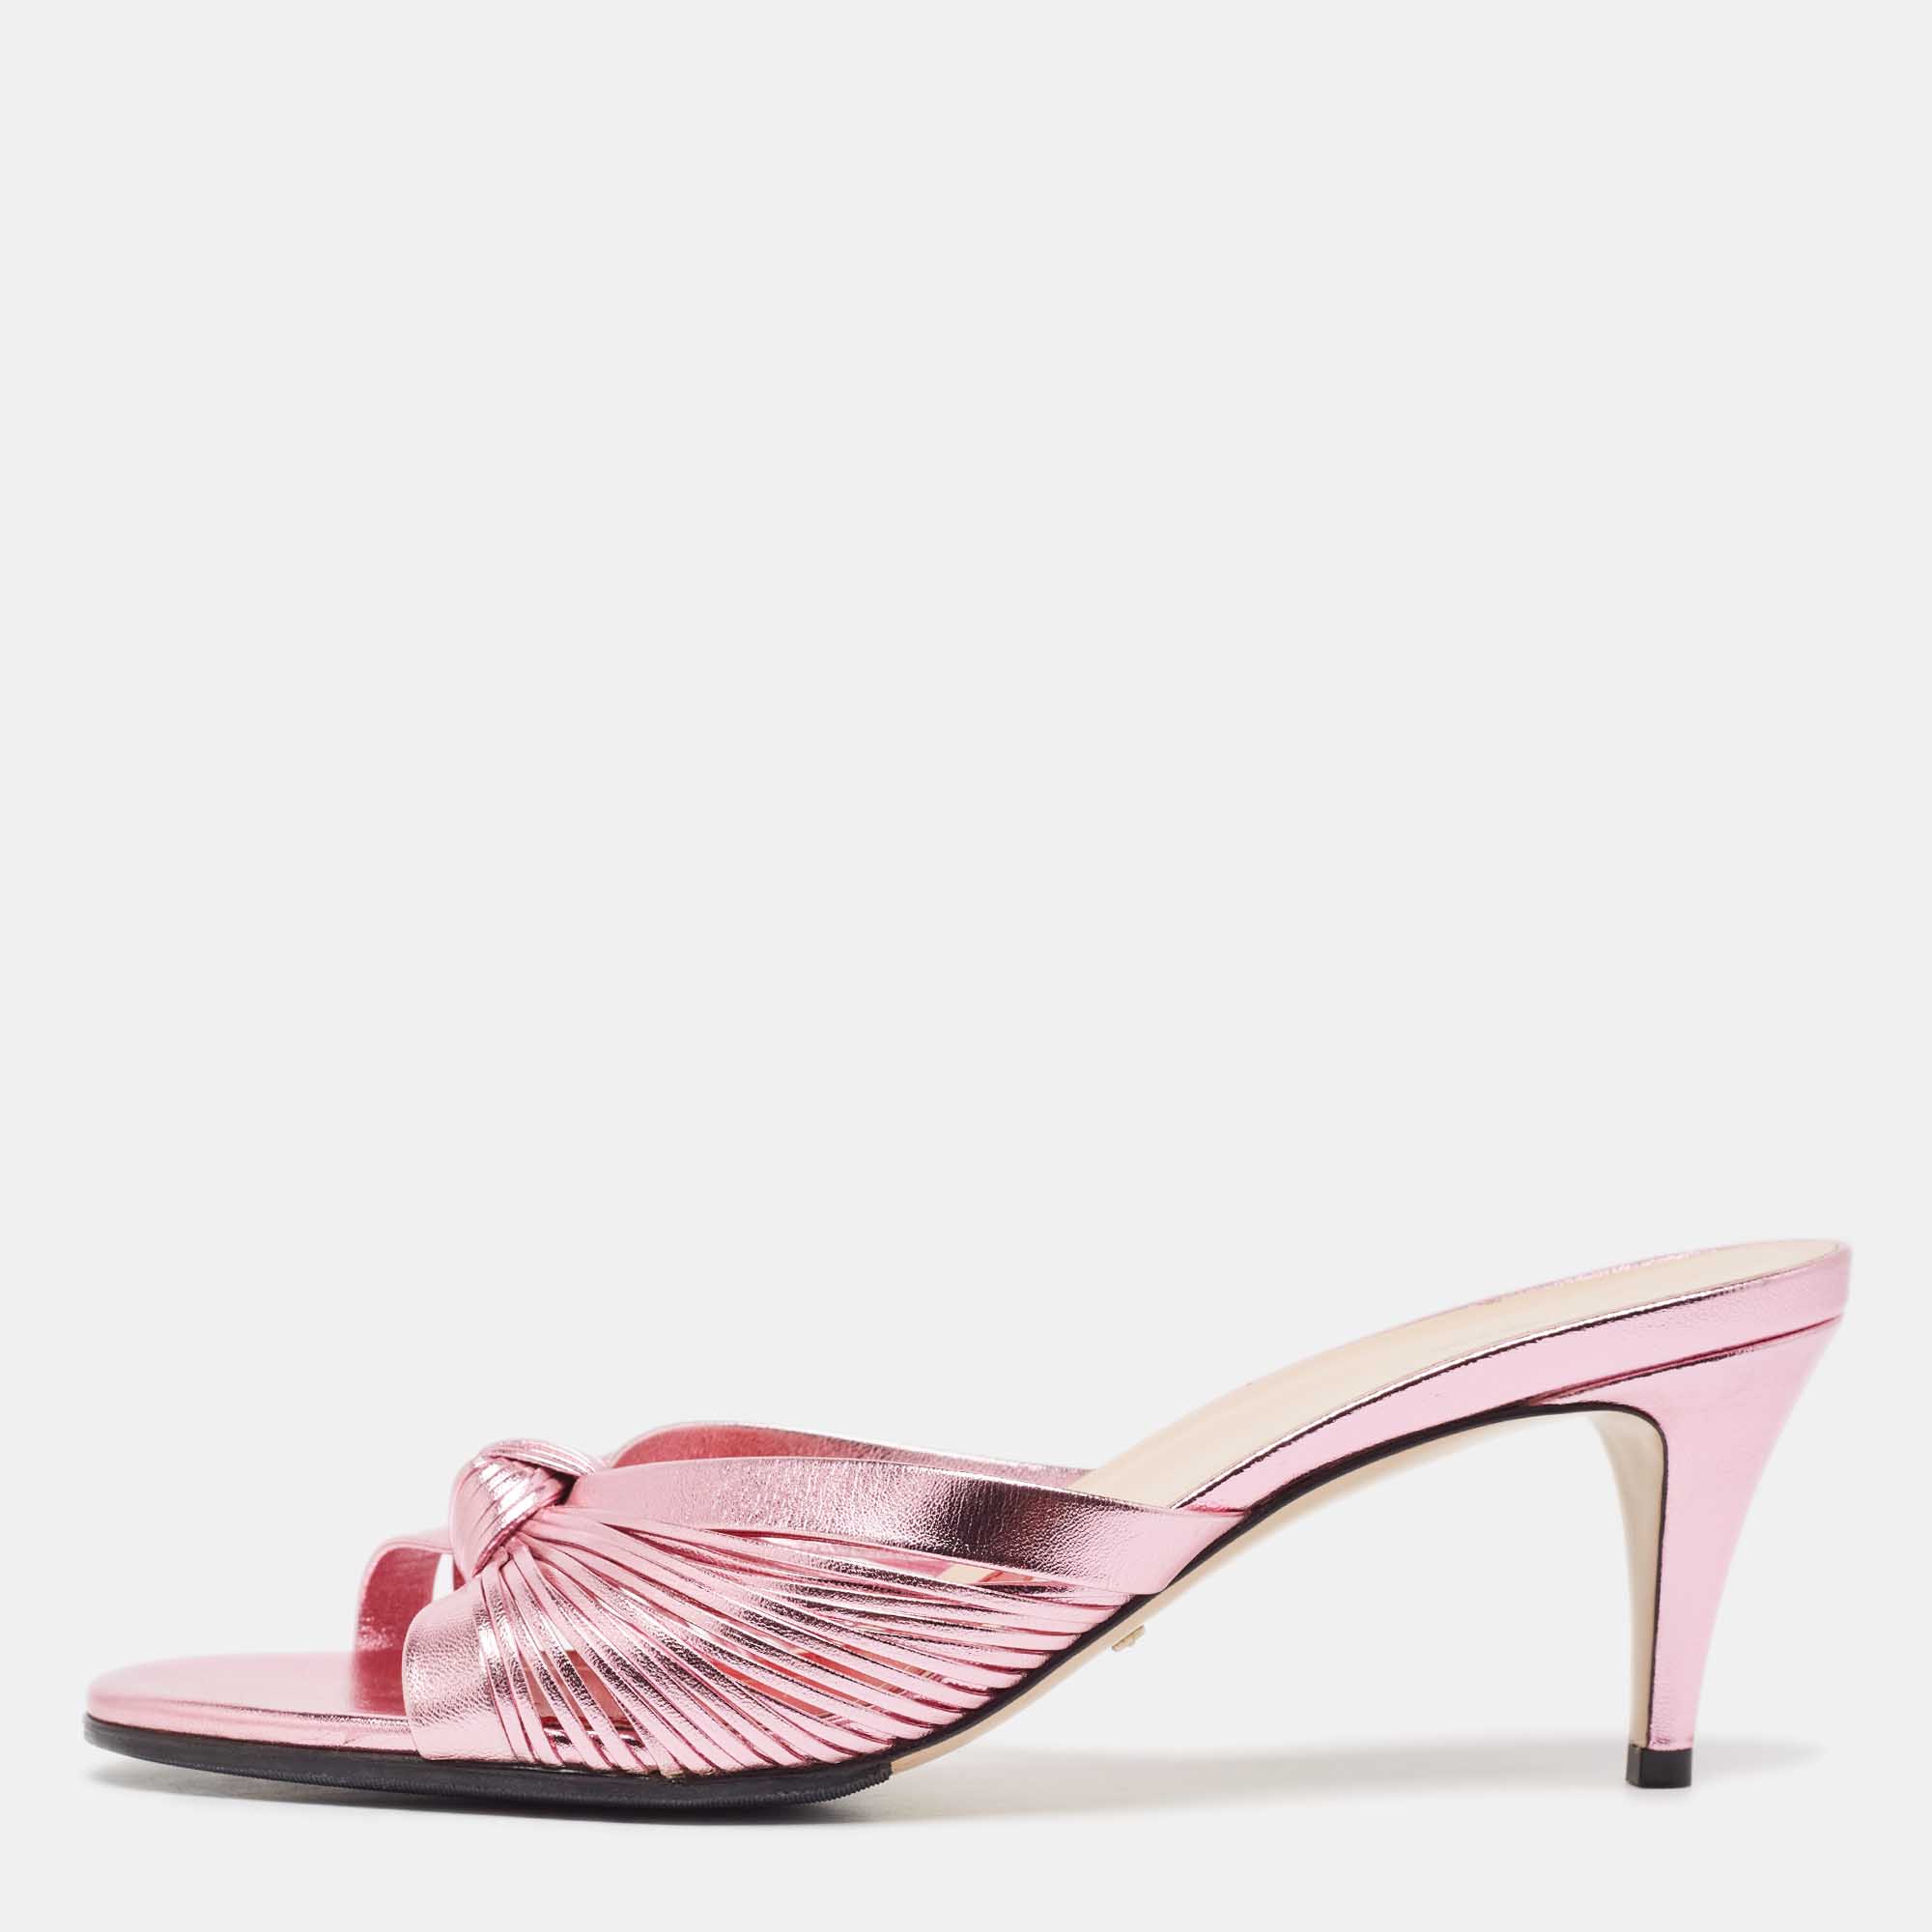 

Gucci Metallic Pink Leather Knotted Slide Sandals Size